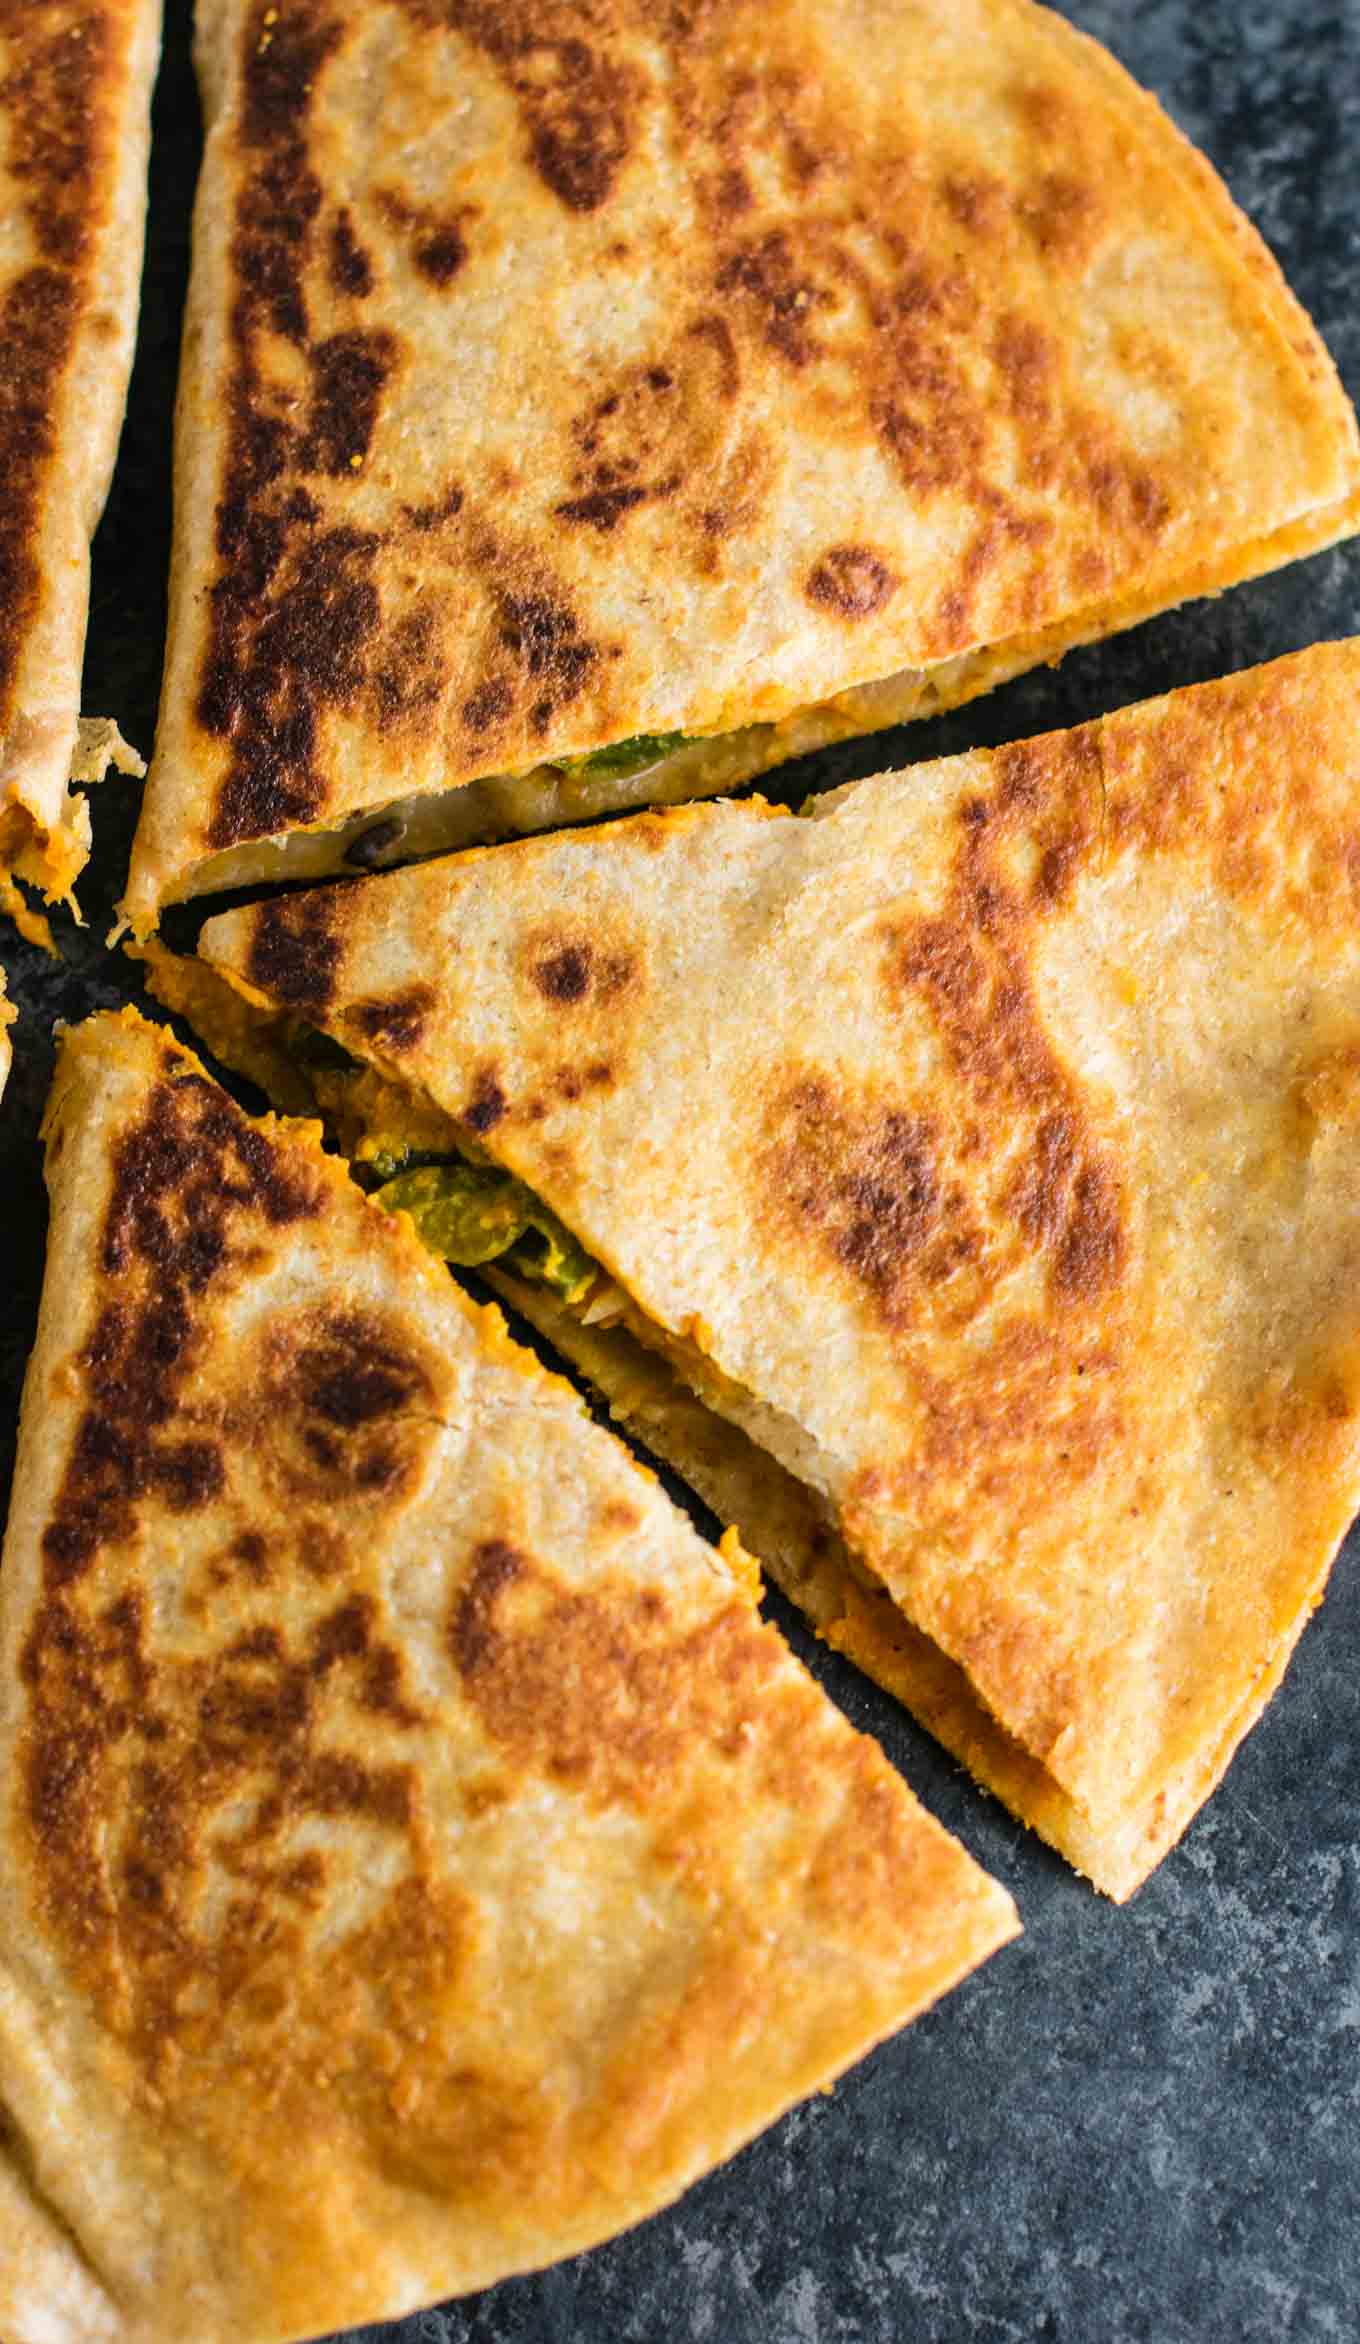 Easy vegan quesadillas recipe packed full of protein and flavor. No meat, no dairy, no vegan cheese! It's a Mexican favorite gone vegan! #vegan #quesadillas #meatless #veganmexican #veganquesadilla #dinner #recipes